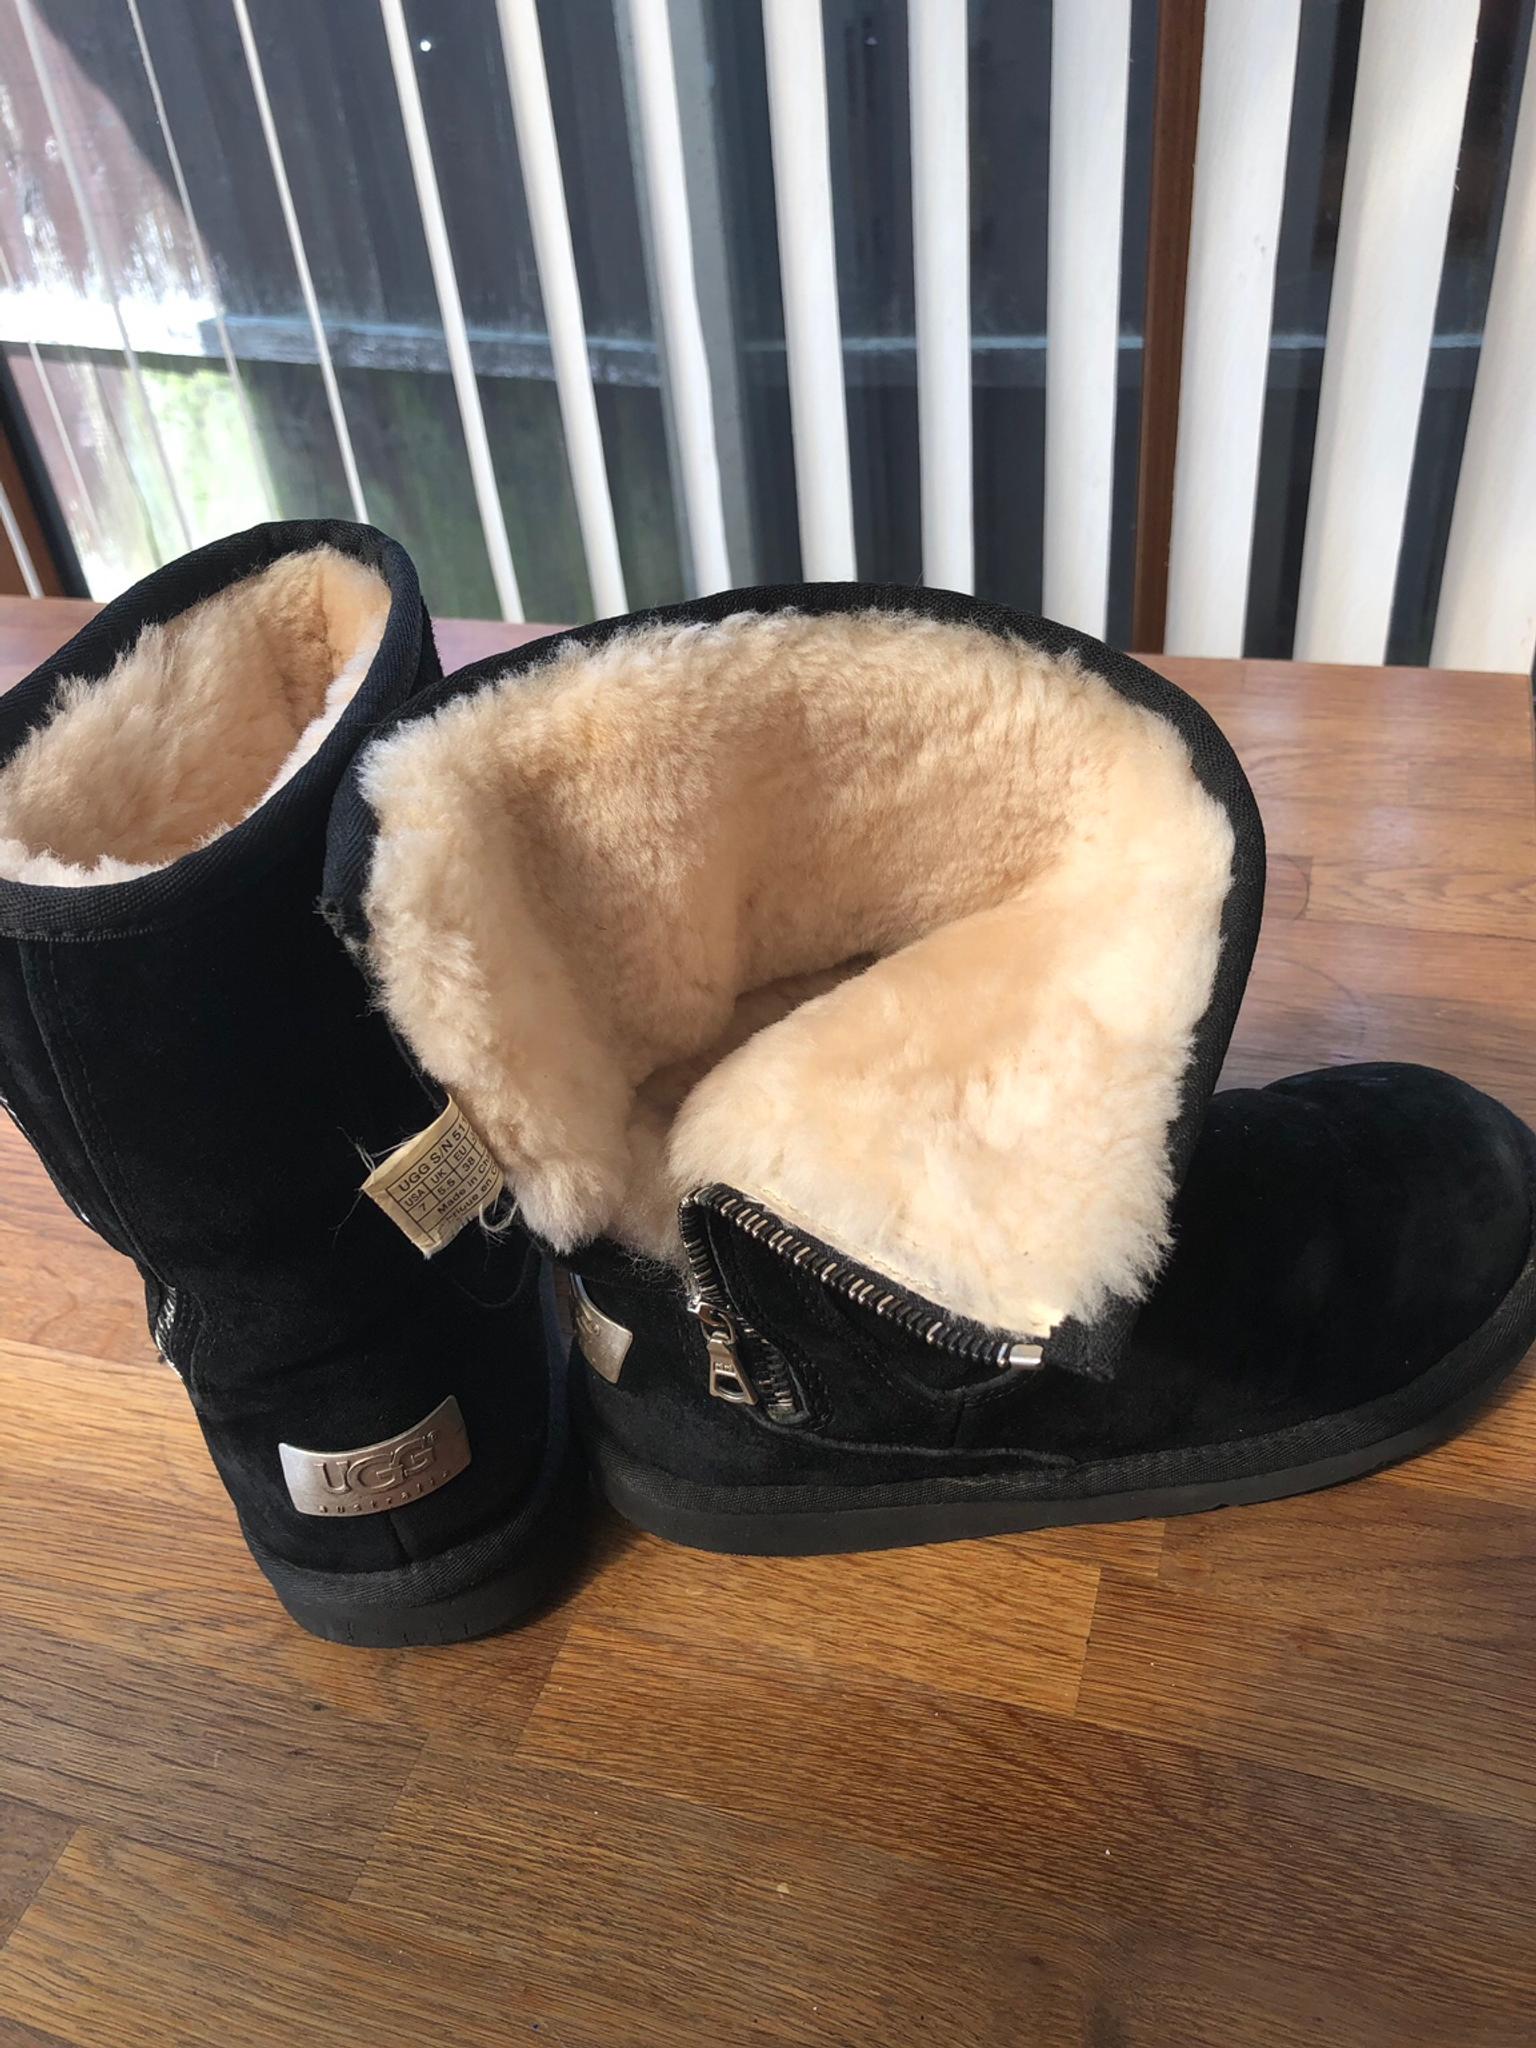 uggs size 5.5